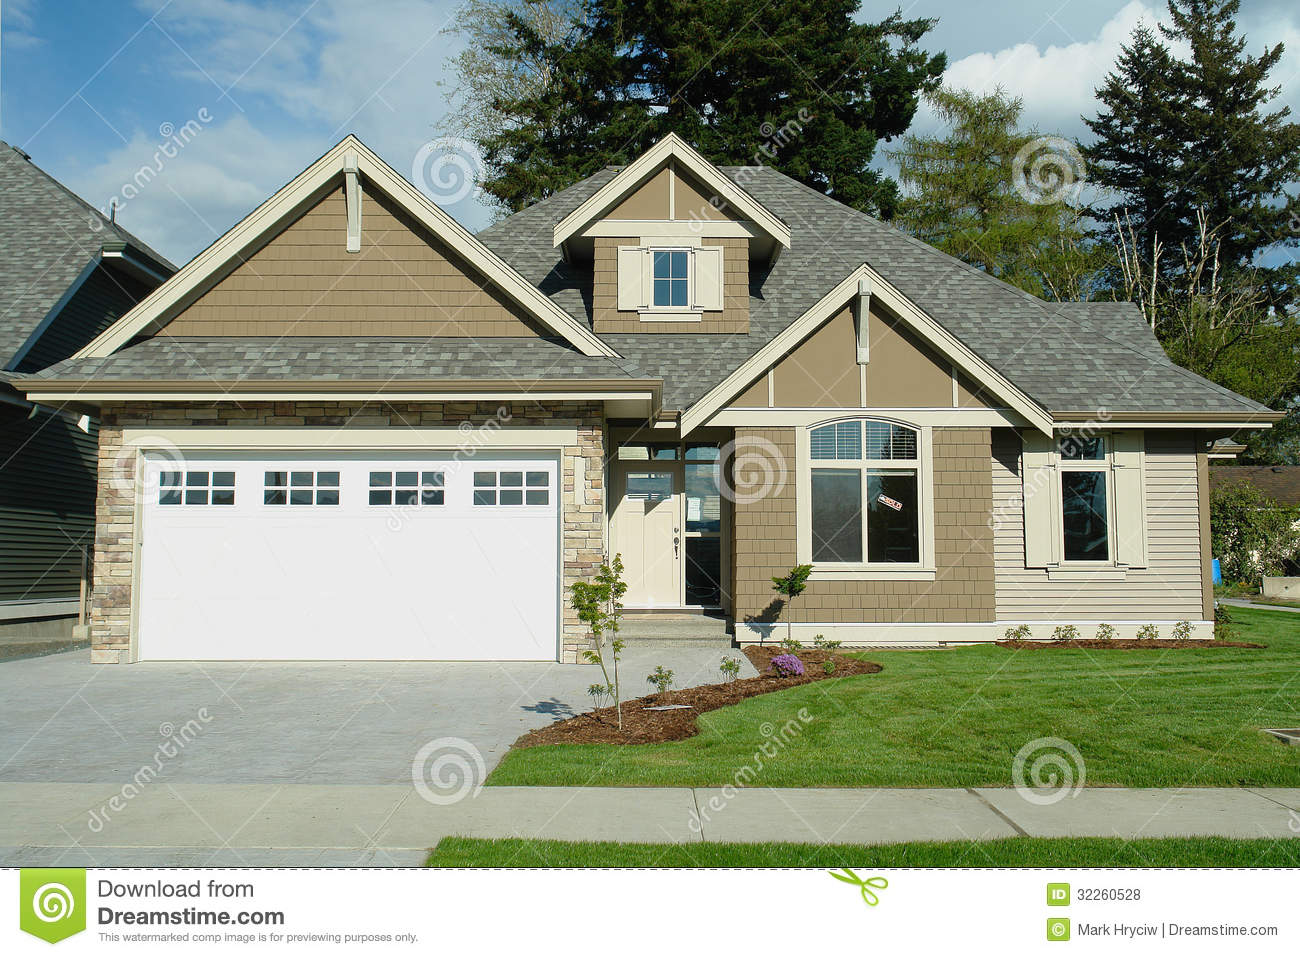 Free Stock Photos of Homes with a Sold Sign